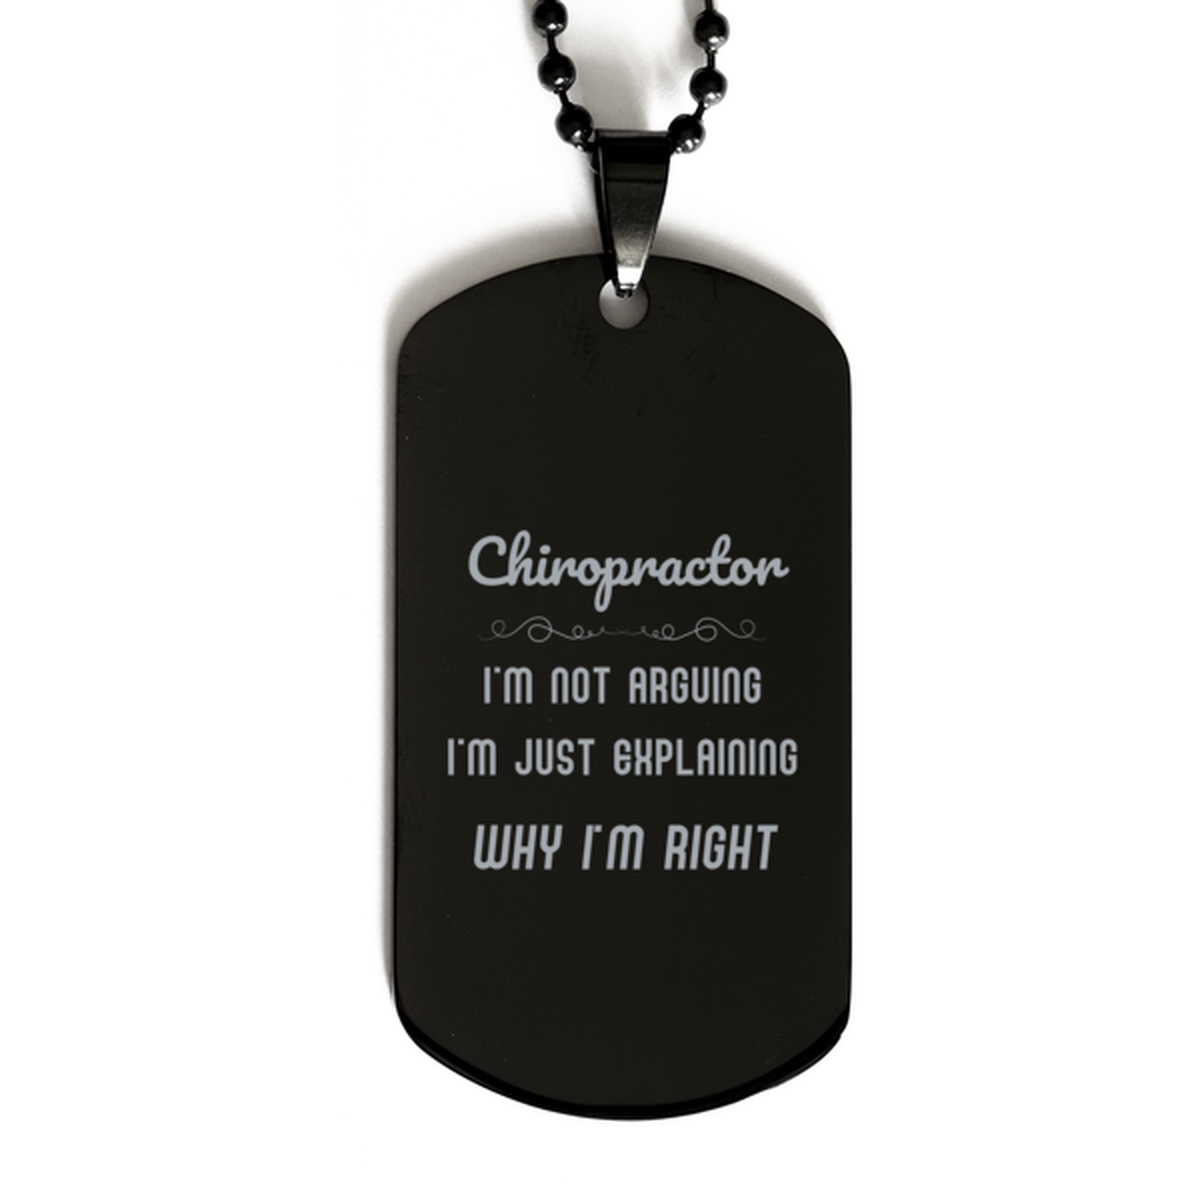 Chiropractor I'm not Arguing. I'm Just Explaining Why I'm RIGHT Black Dog Tag, Funny Saying Quote Chiropractor Gifts For Chiropractor Graduation Birthday Christmas Gifts for Men Women Coworker